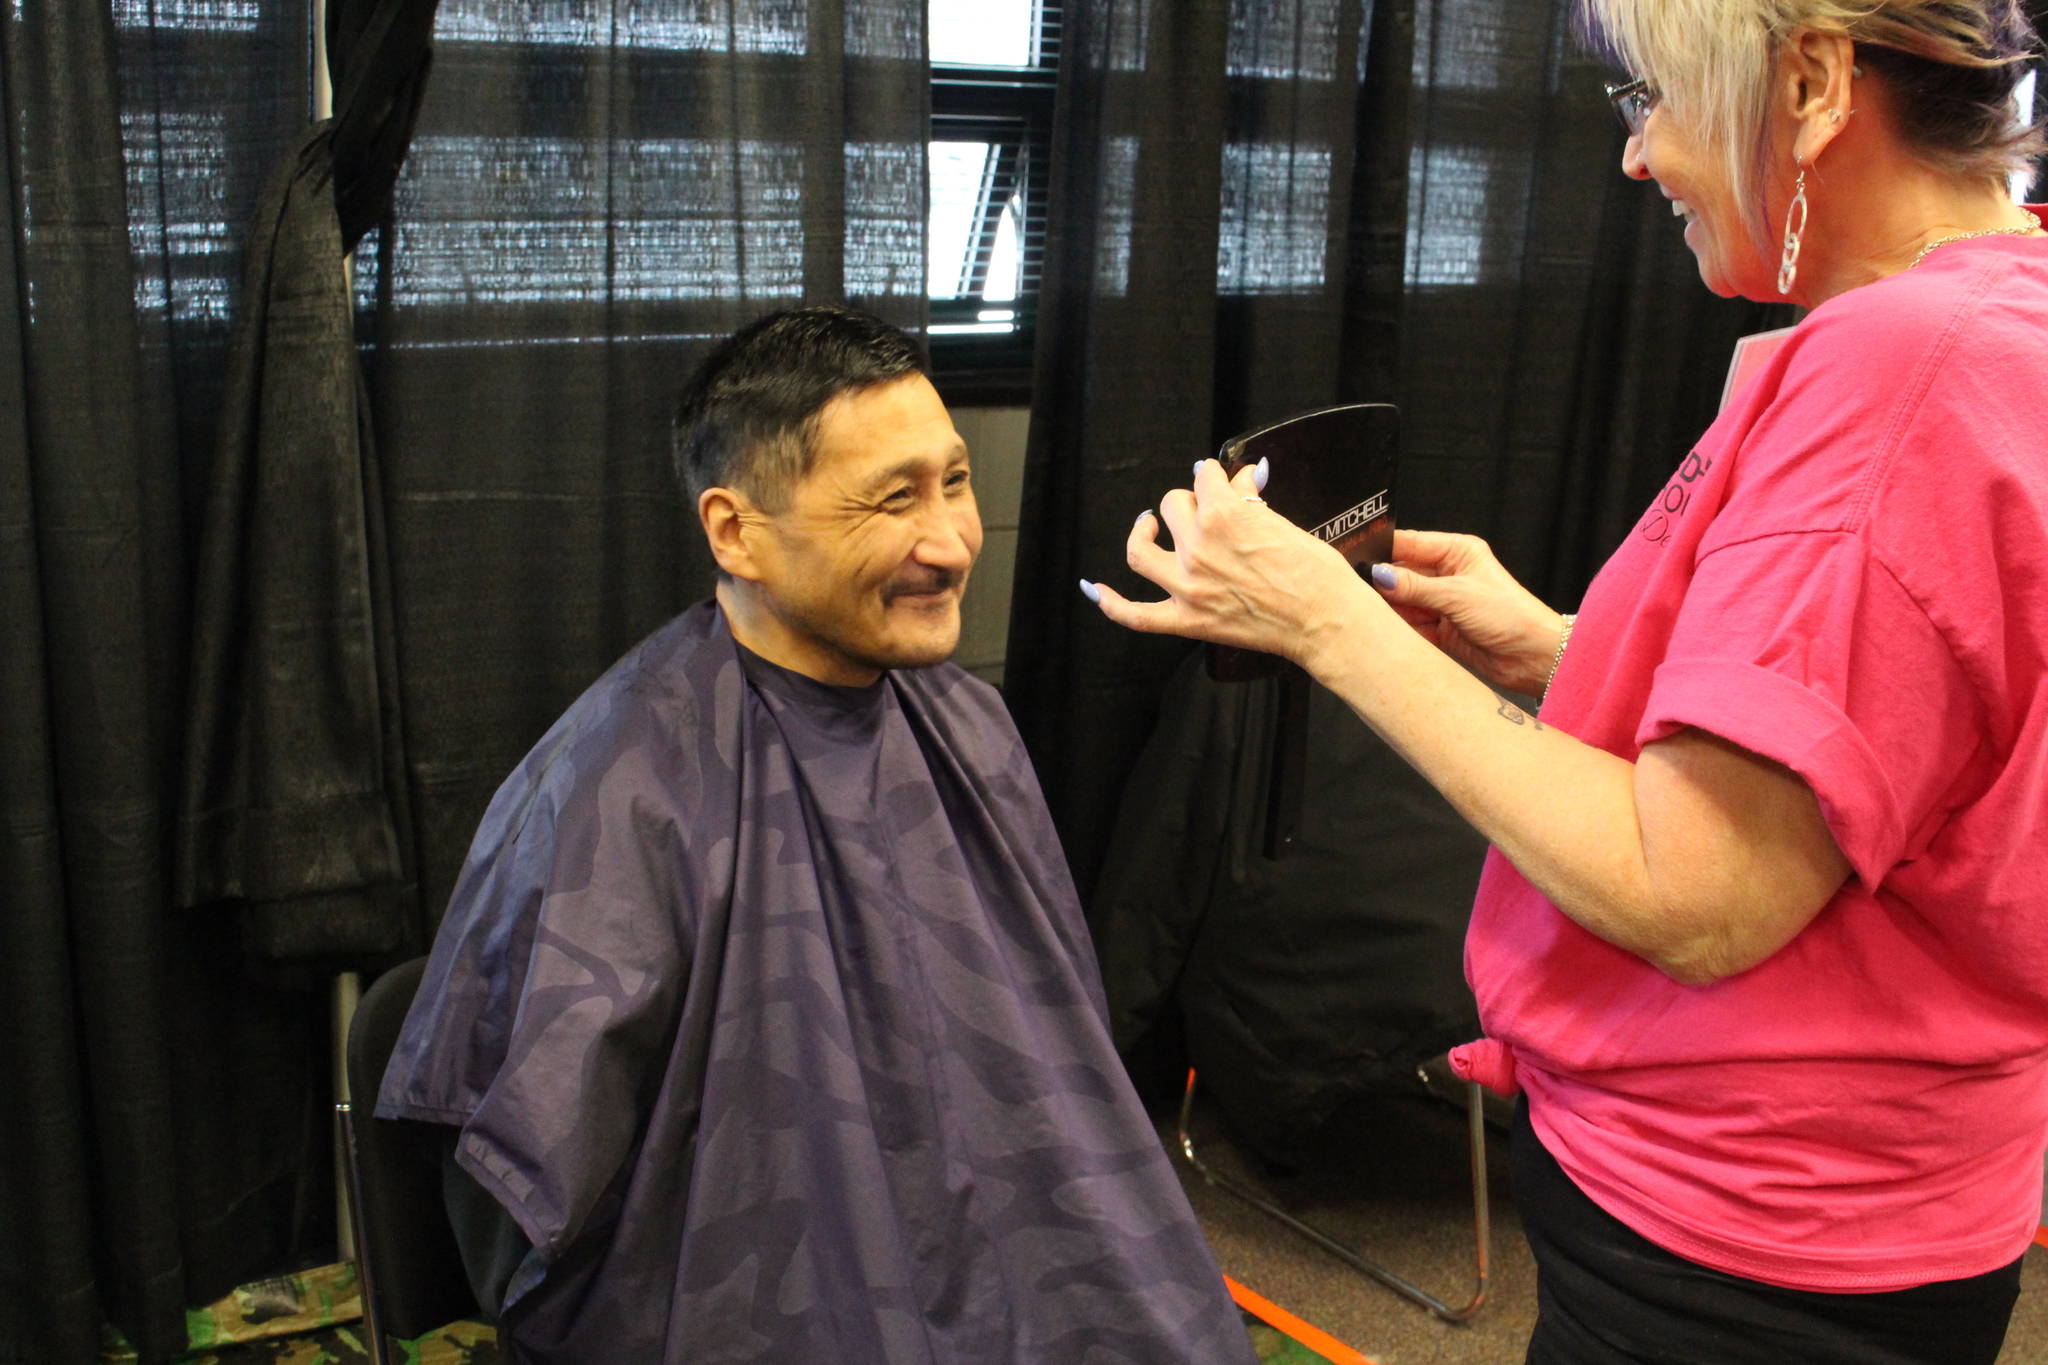 Henry Smith checks out his fresh haircut courtesy of Gail Kennedy during the 2020 Project Homeless Connect event at the Soldotna Regional Sports Complex in Soldotna, Alaska, on Jan. 29, 2020. (Photo by Brian Mazurek/Peninsula Clarion)